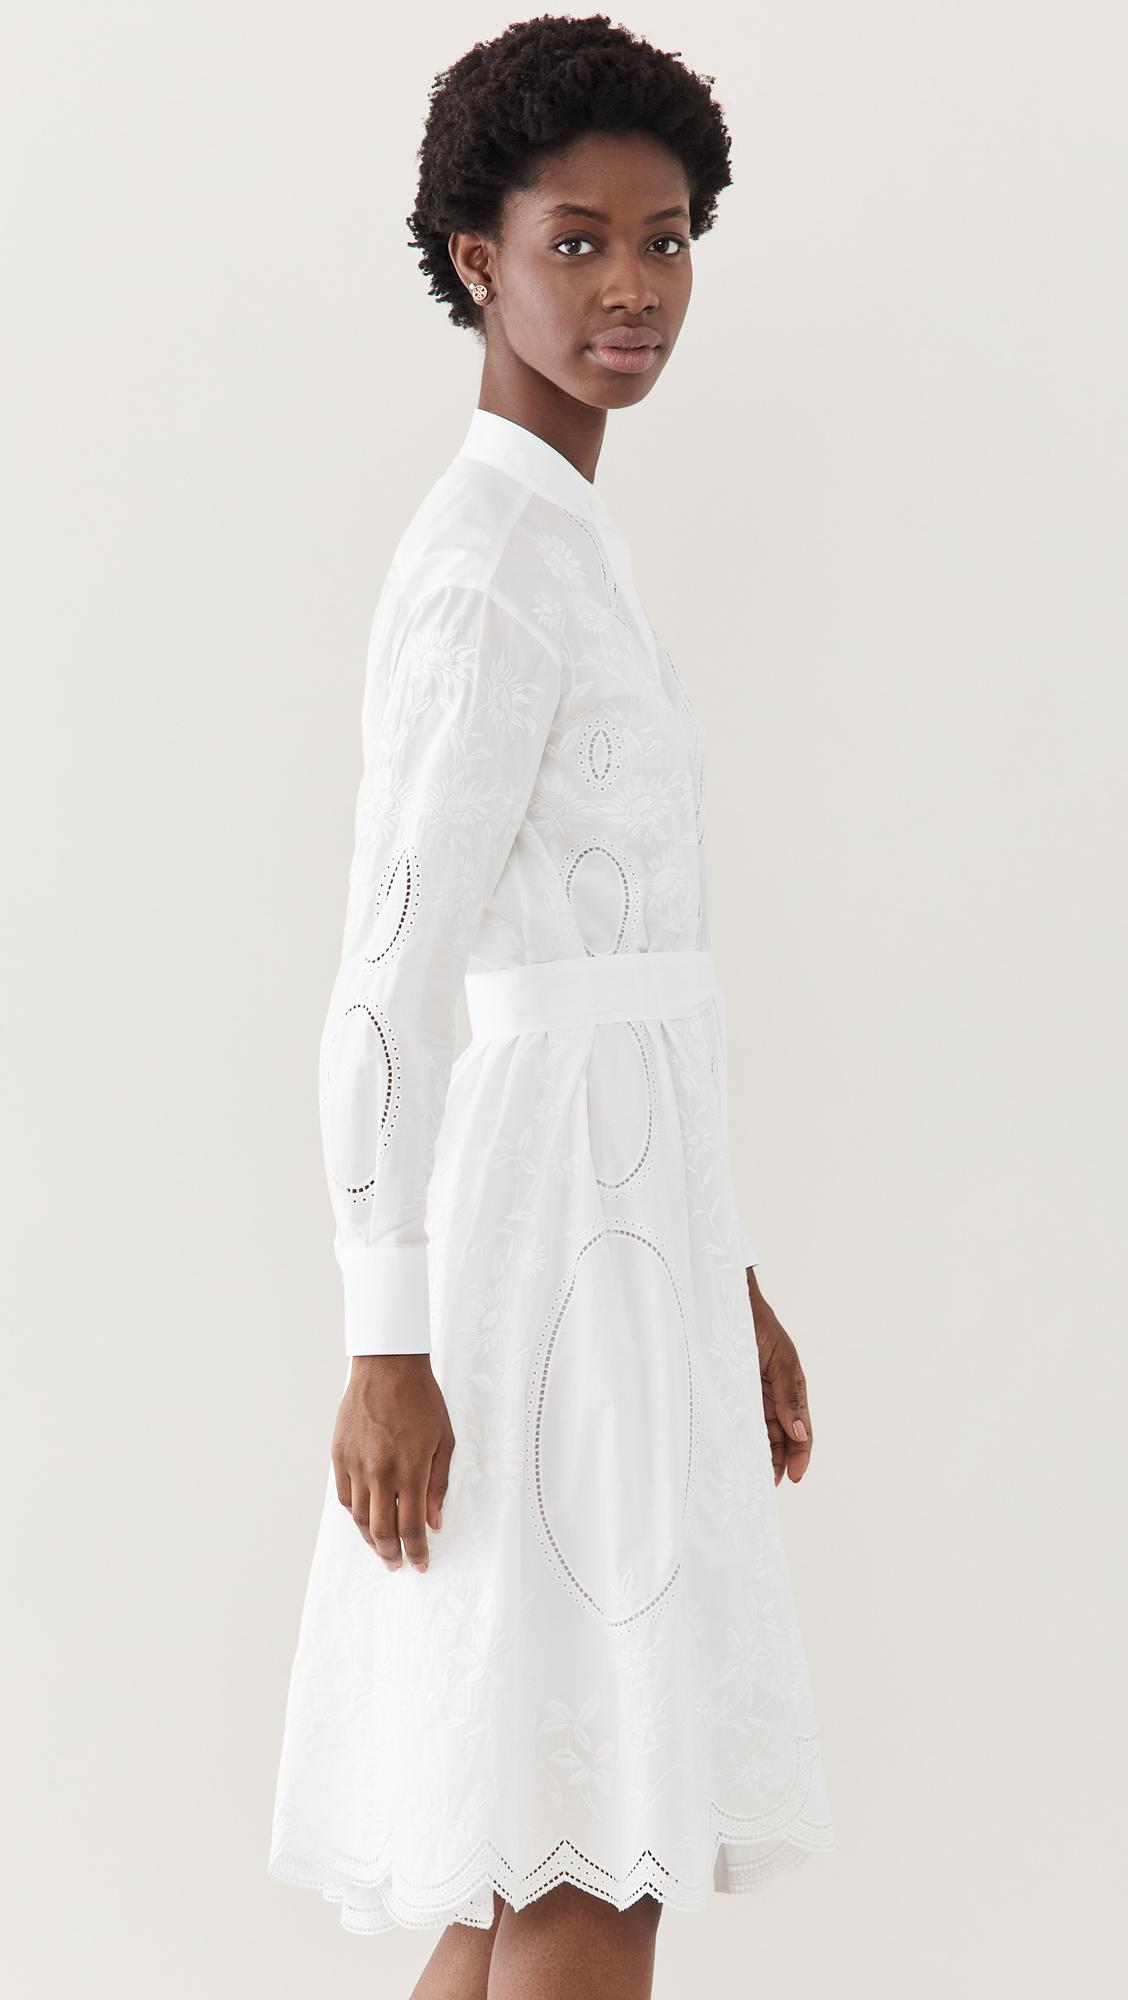 Tory Burch Poplin Embroidered Dress in White | Lyst